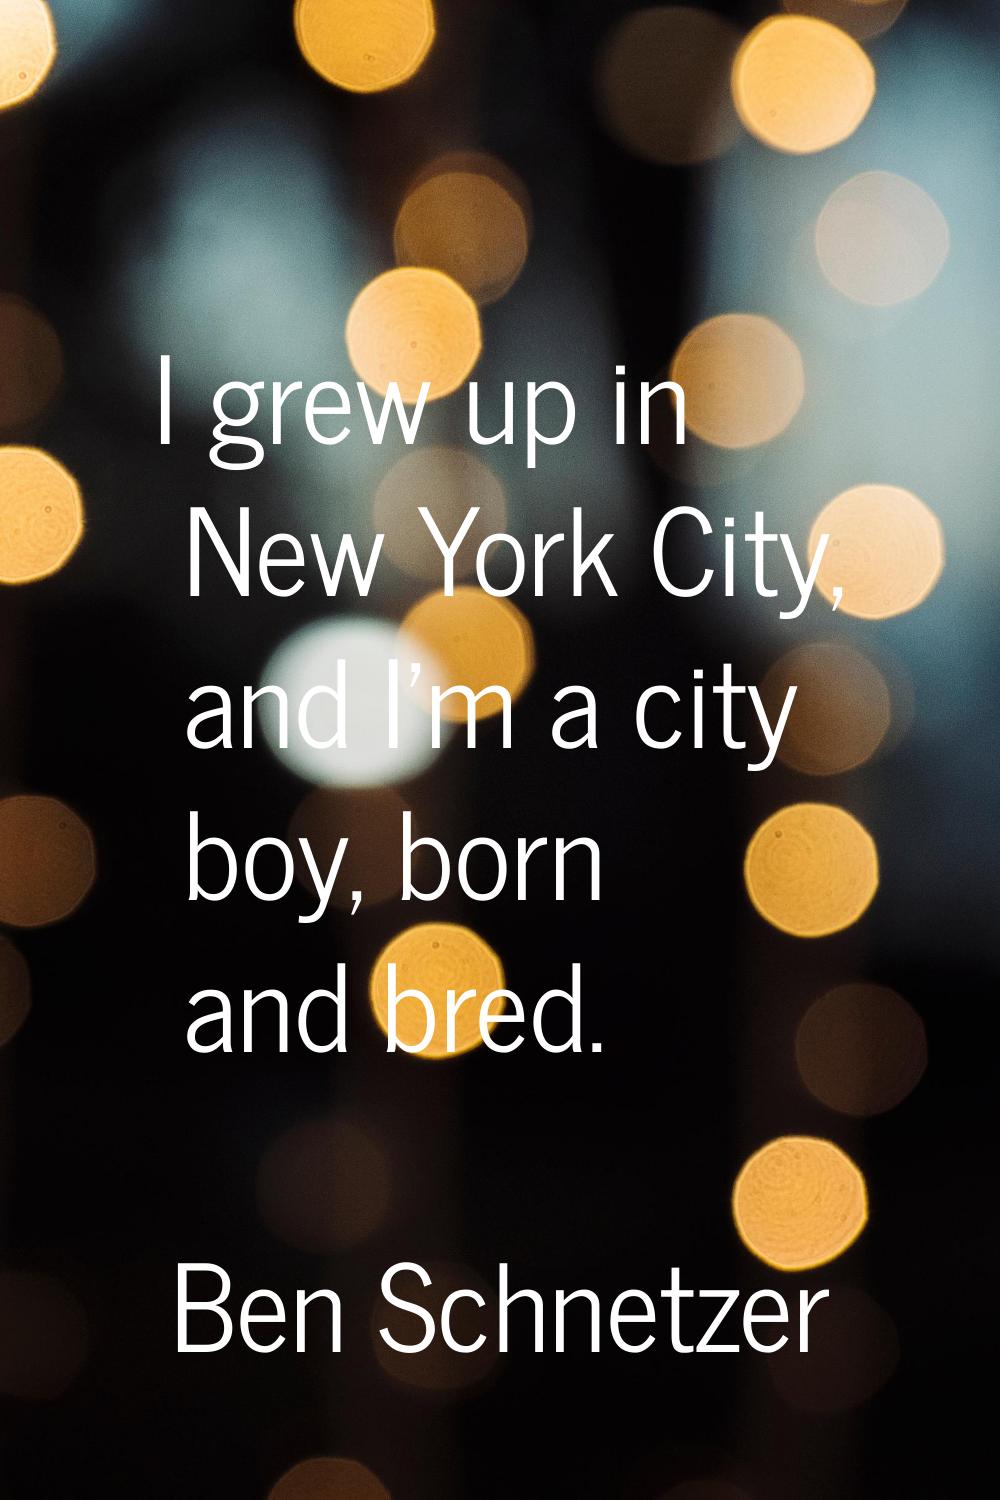 I grew up in New York City, and I'm a city boy, born and bred.